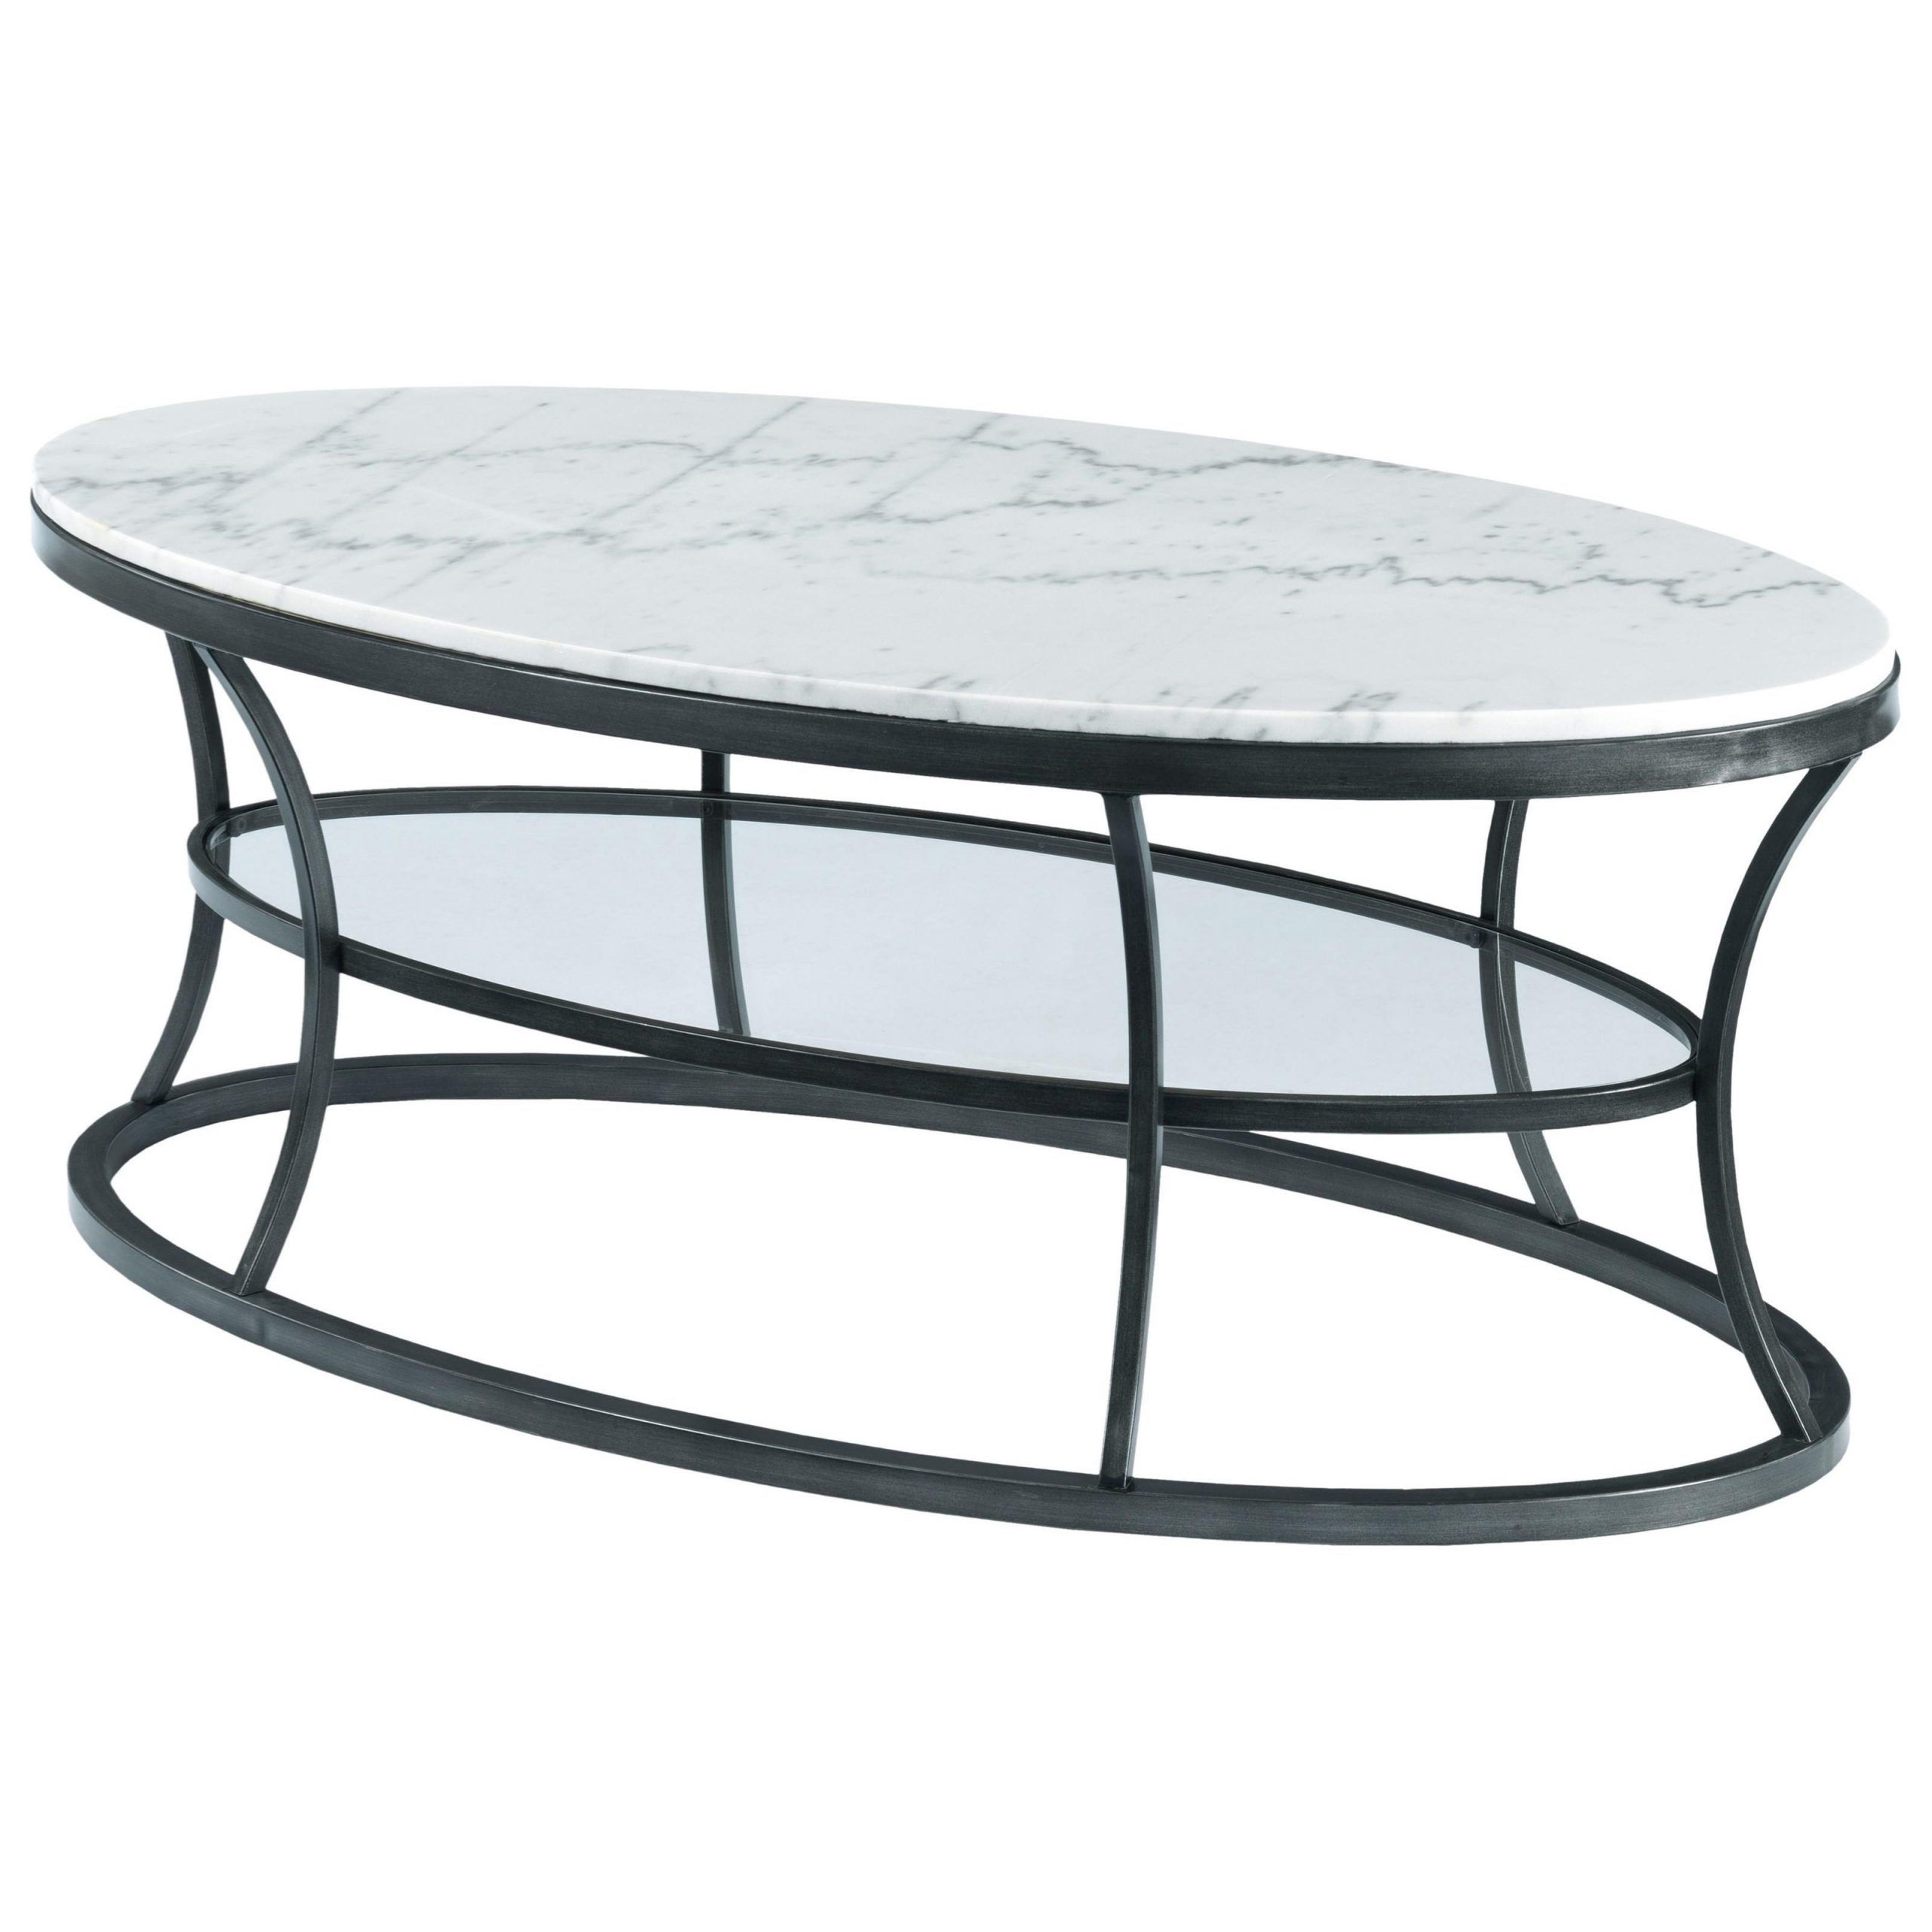 Hammary Impact Oval Cocktail Table With Marble Top And With Regard To Well Liked Glass And Gold Oval Coffee Tables (View 5 of 20)